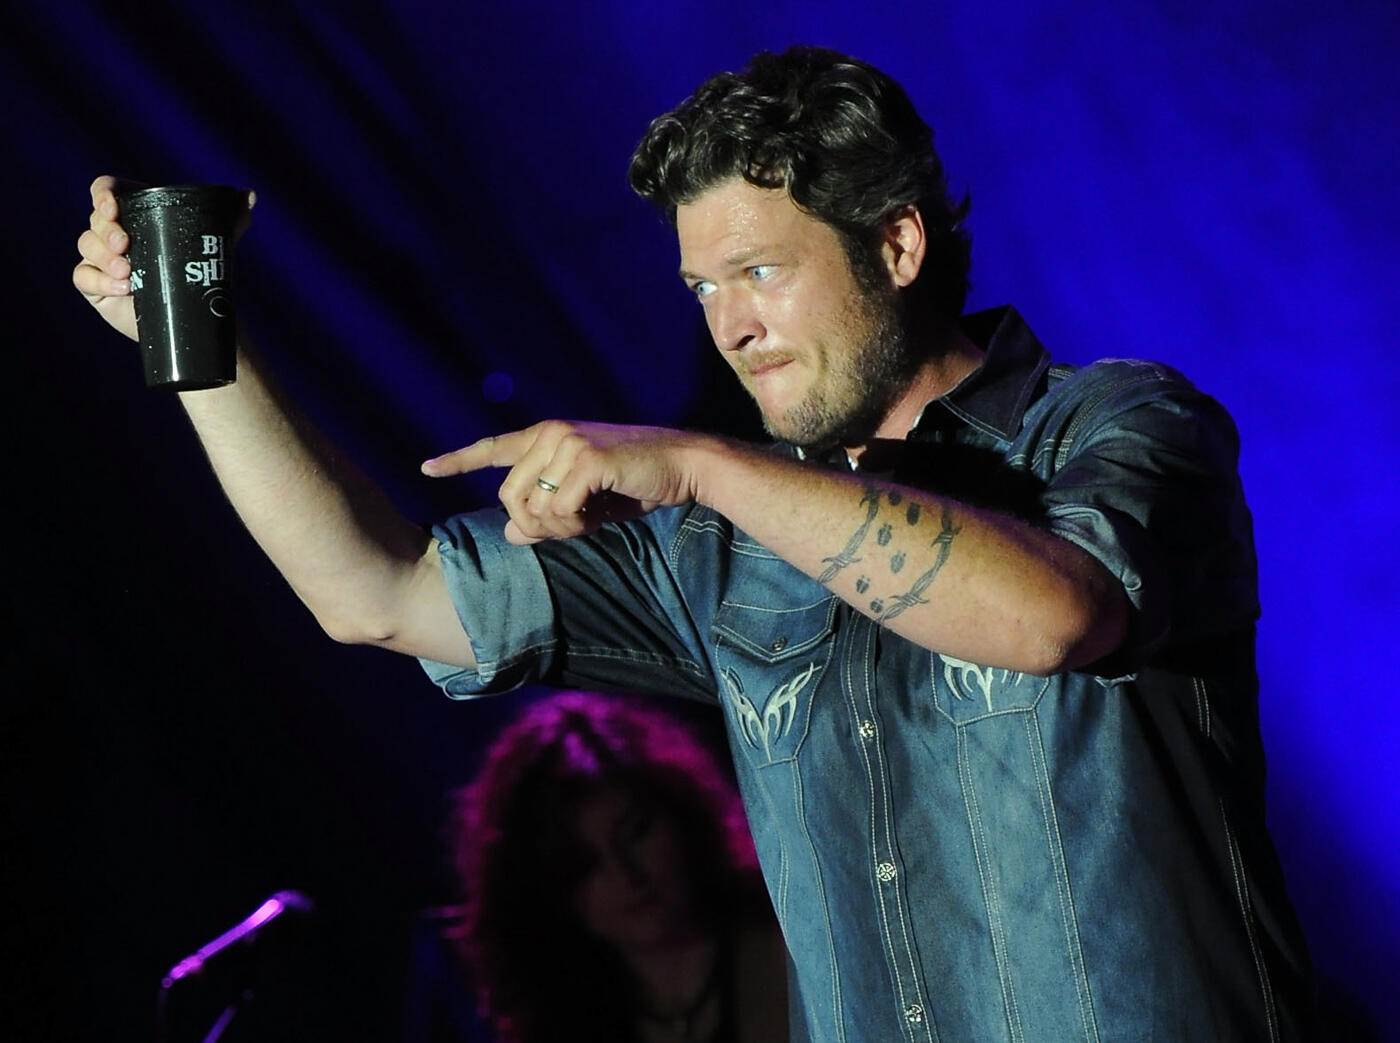 TWIN LAKES, WI - JULY 21:  Singer/Songwriter Blake Shelton performs at Country Thunder - Day 3 on July 21, 2012 in Twin Lakes, Wisconsin.  (Photo by Rick Diamond/Getty Images for Country Thunder)